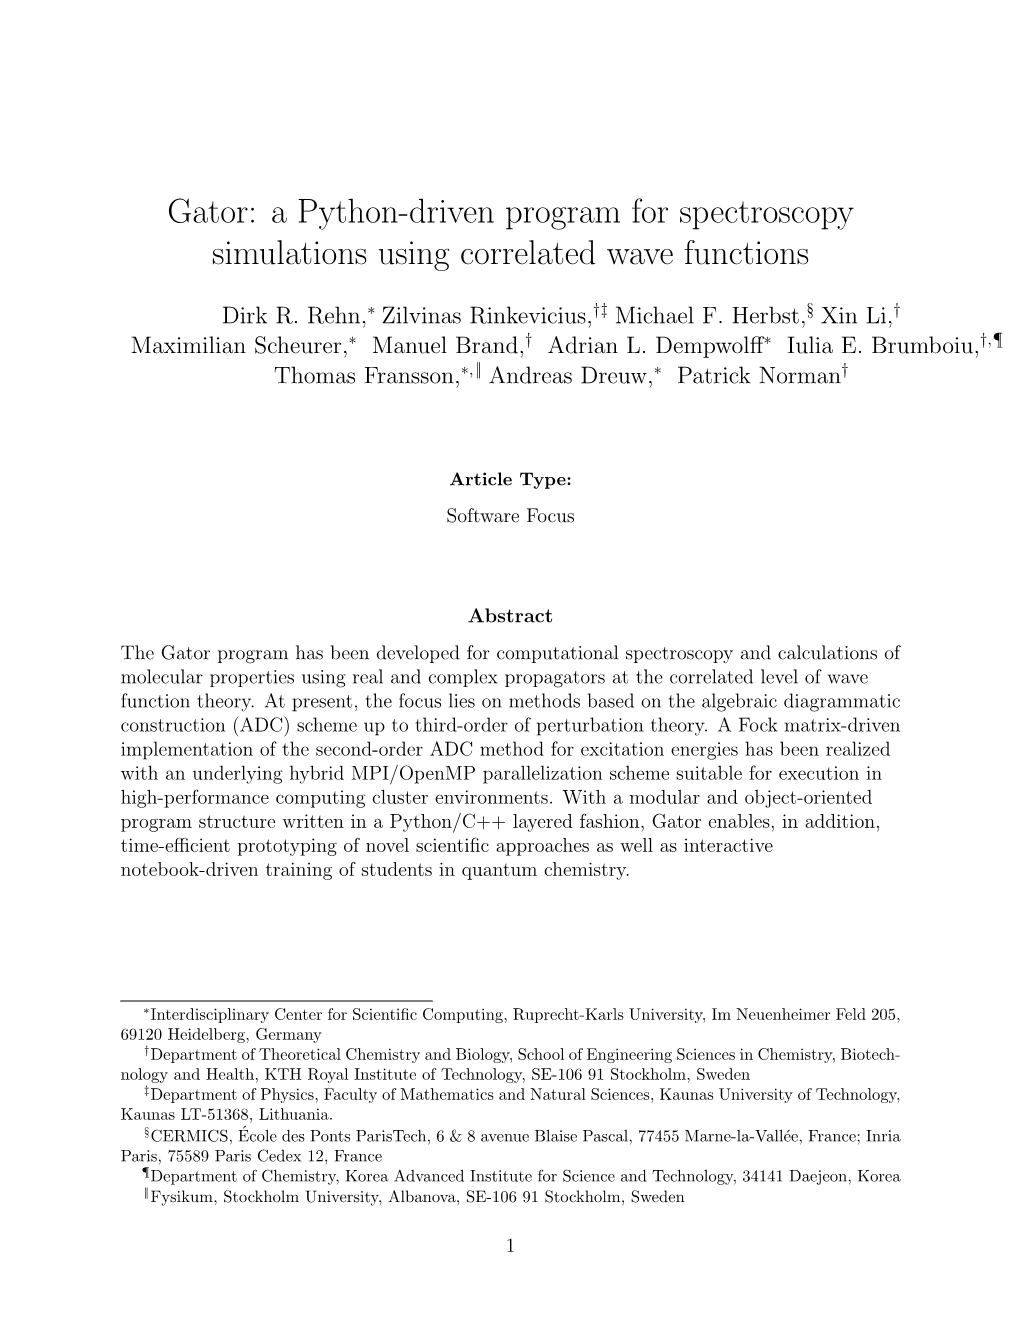 Gator: a Python-Driven Program for Spectroscopy Simulations Using Correlated Wave Functions